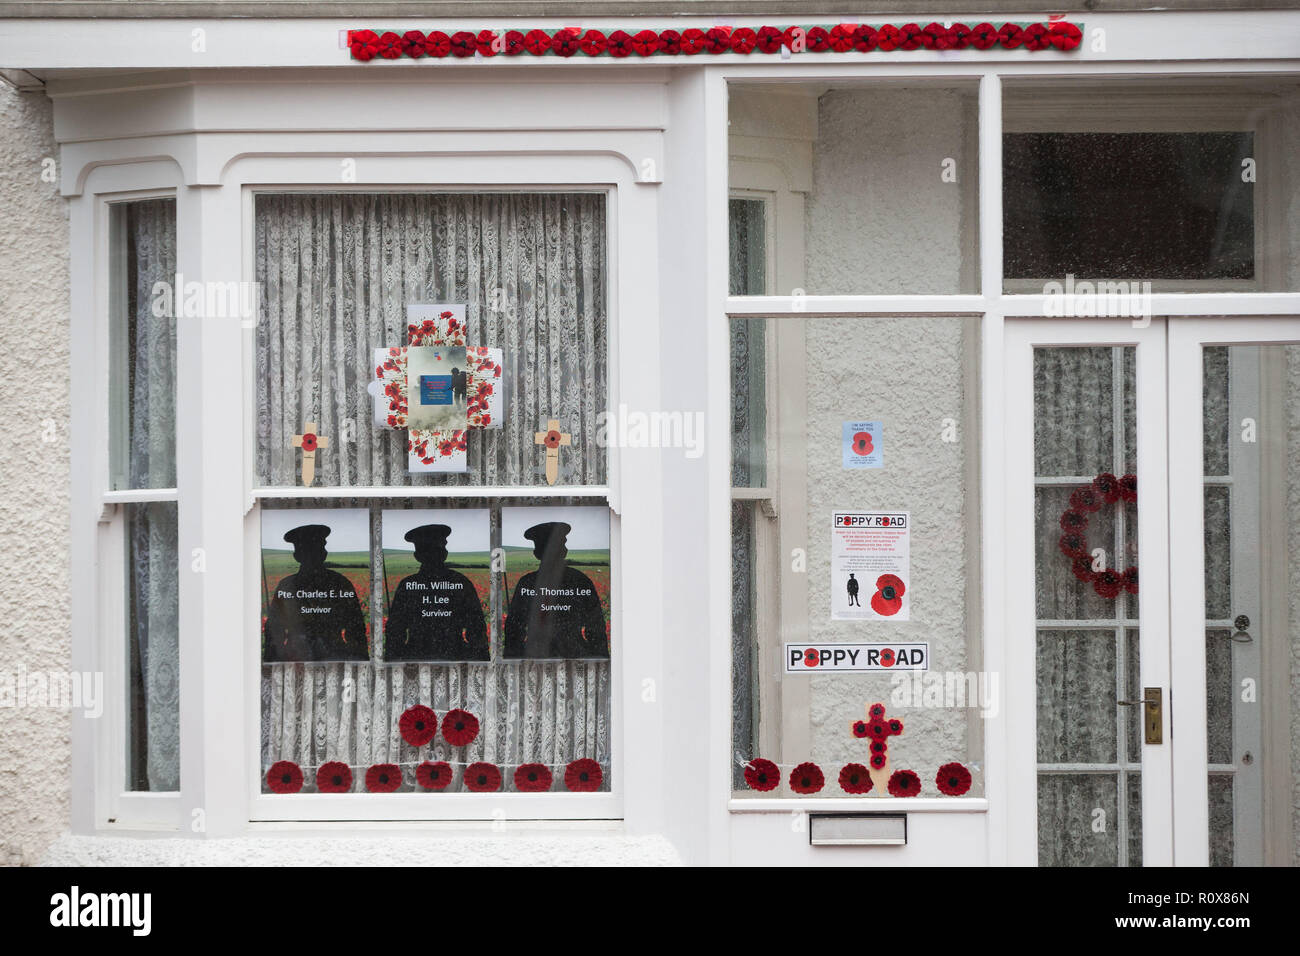 A house in Station Road, Aldridge in Walsall which has transformed itself into Poppy Road as almost 100 houses have been decorated with 24,000 red poppies and silhouette statues of soldiers to honour local people who endured and lost their lives in the First World War. Stock Photo